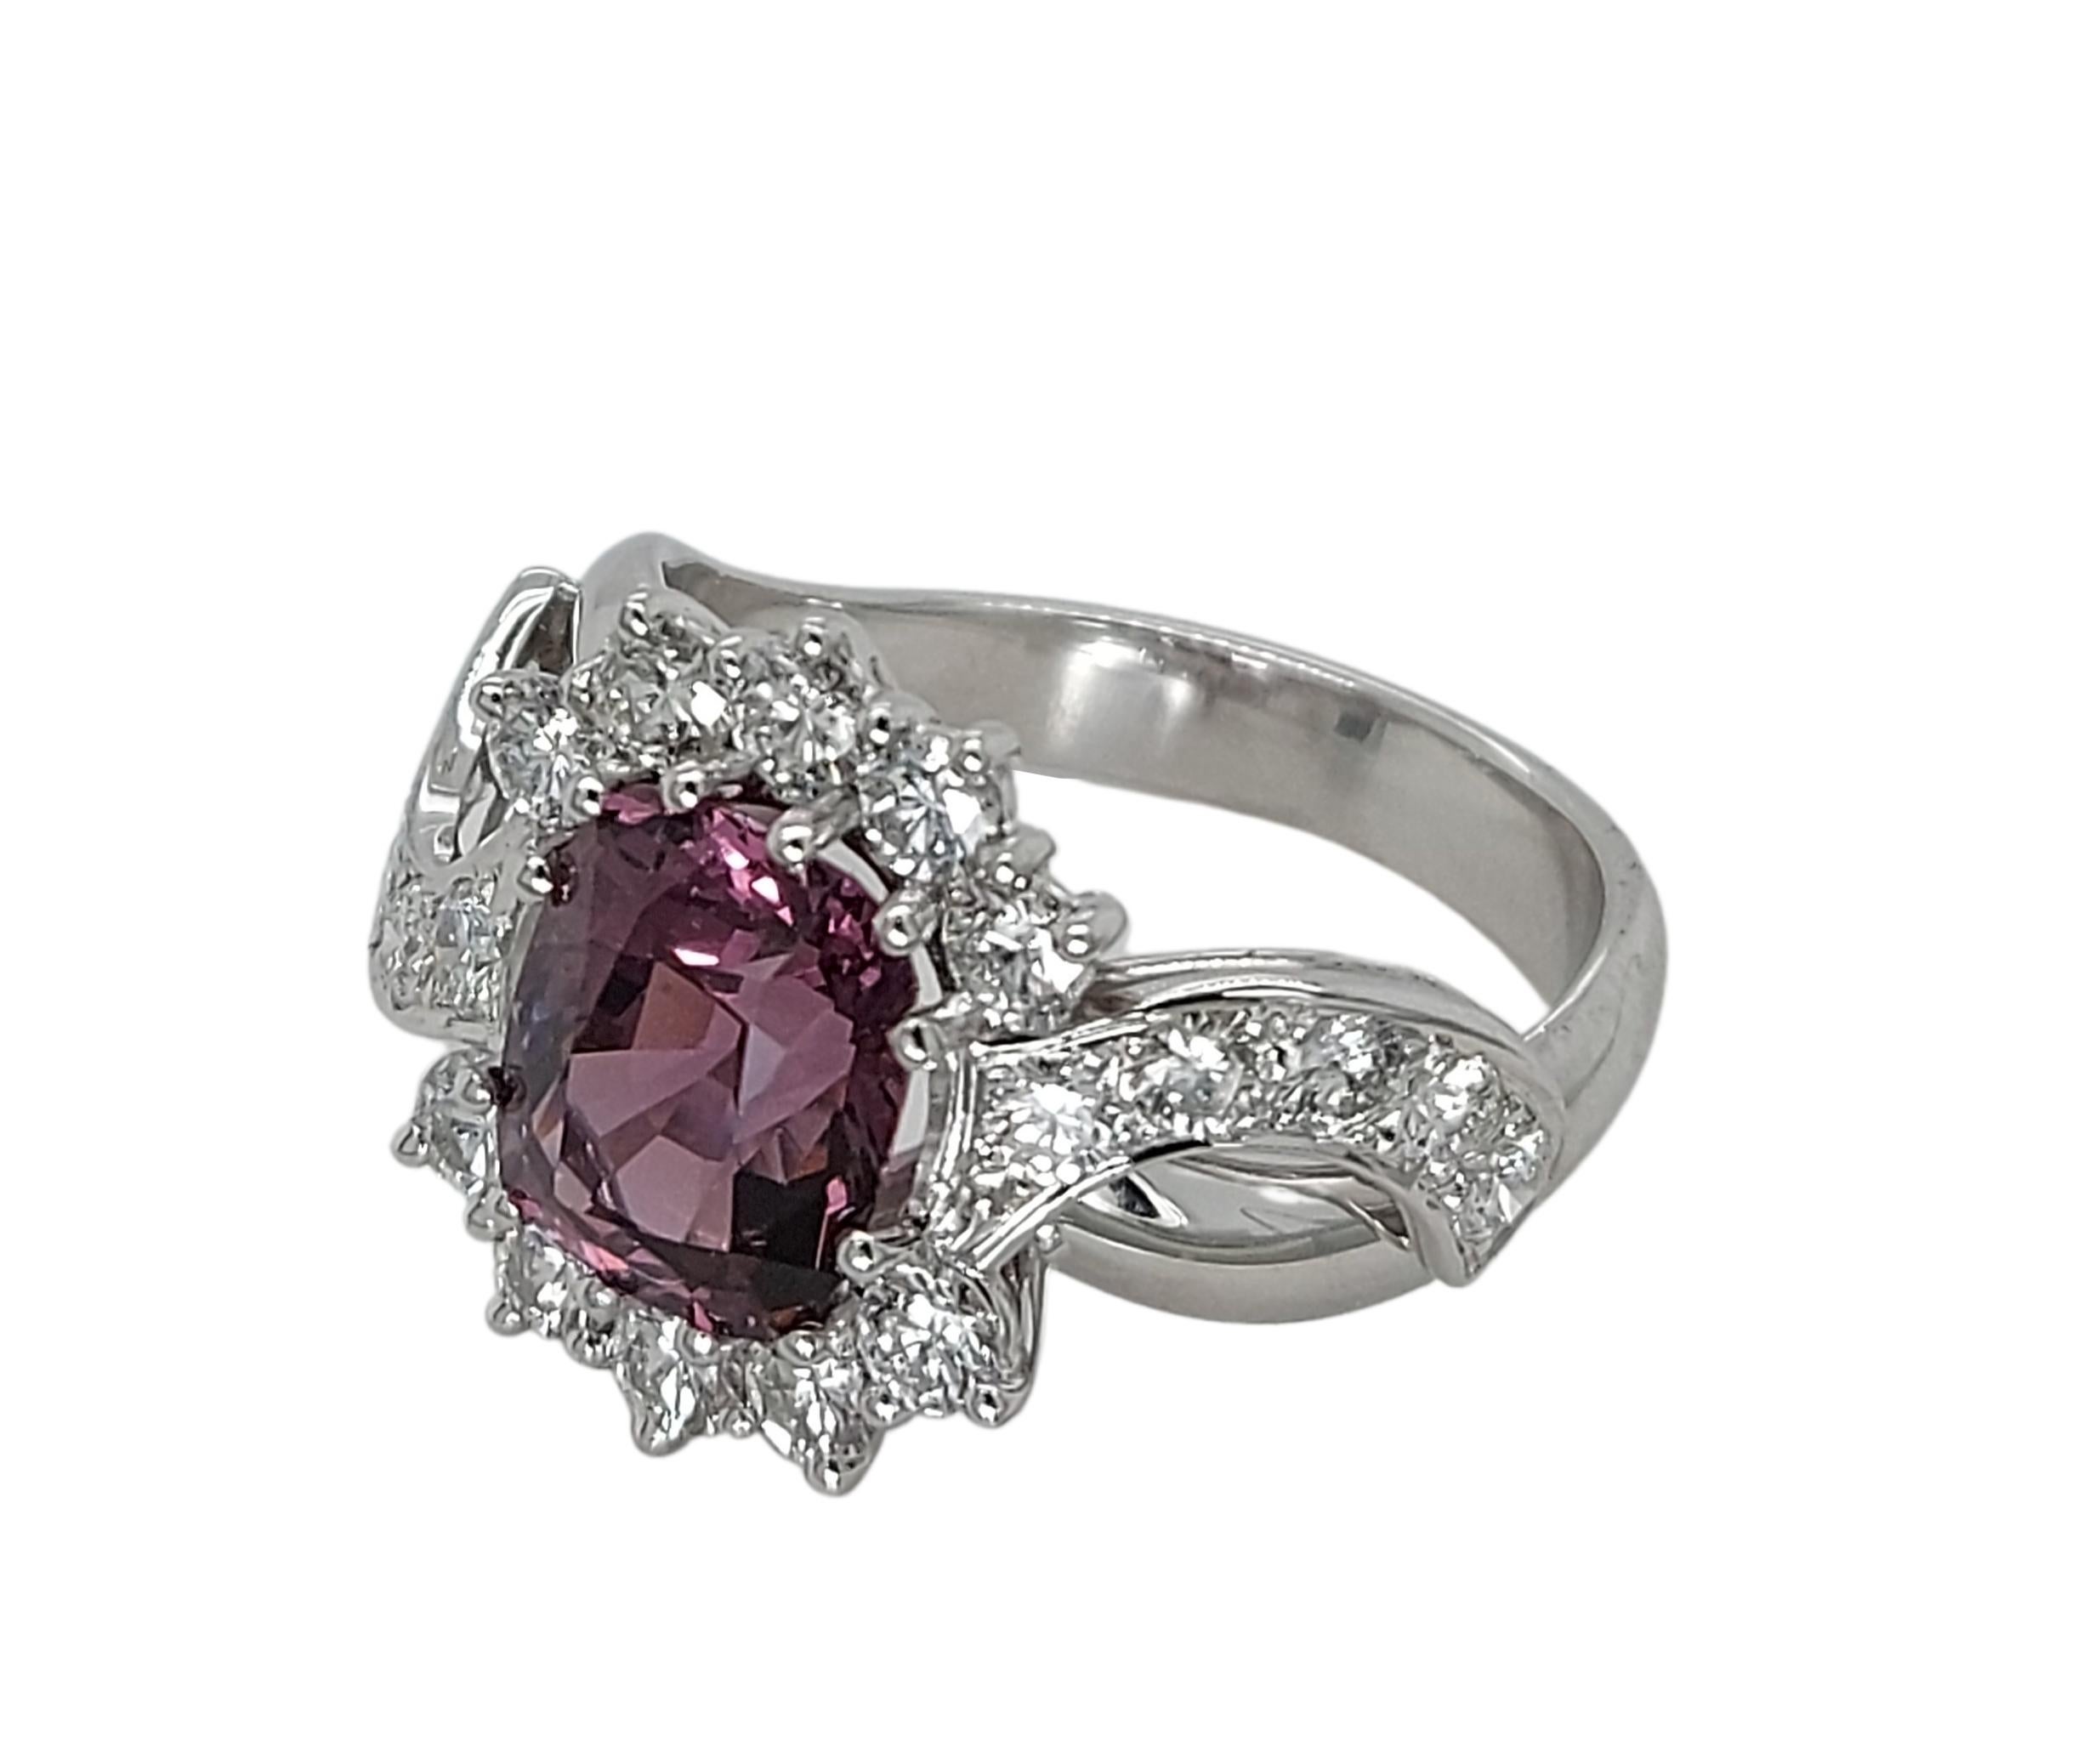 18kt White Gold Ring with a 3.25 Ct No Heat Spinel Stone and 1.2ct Diamonds For Sale 2